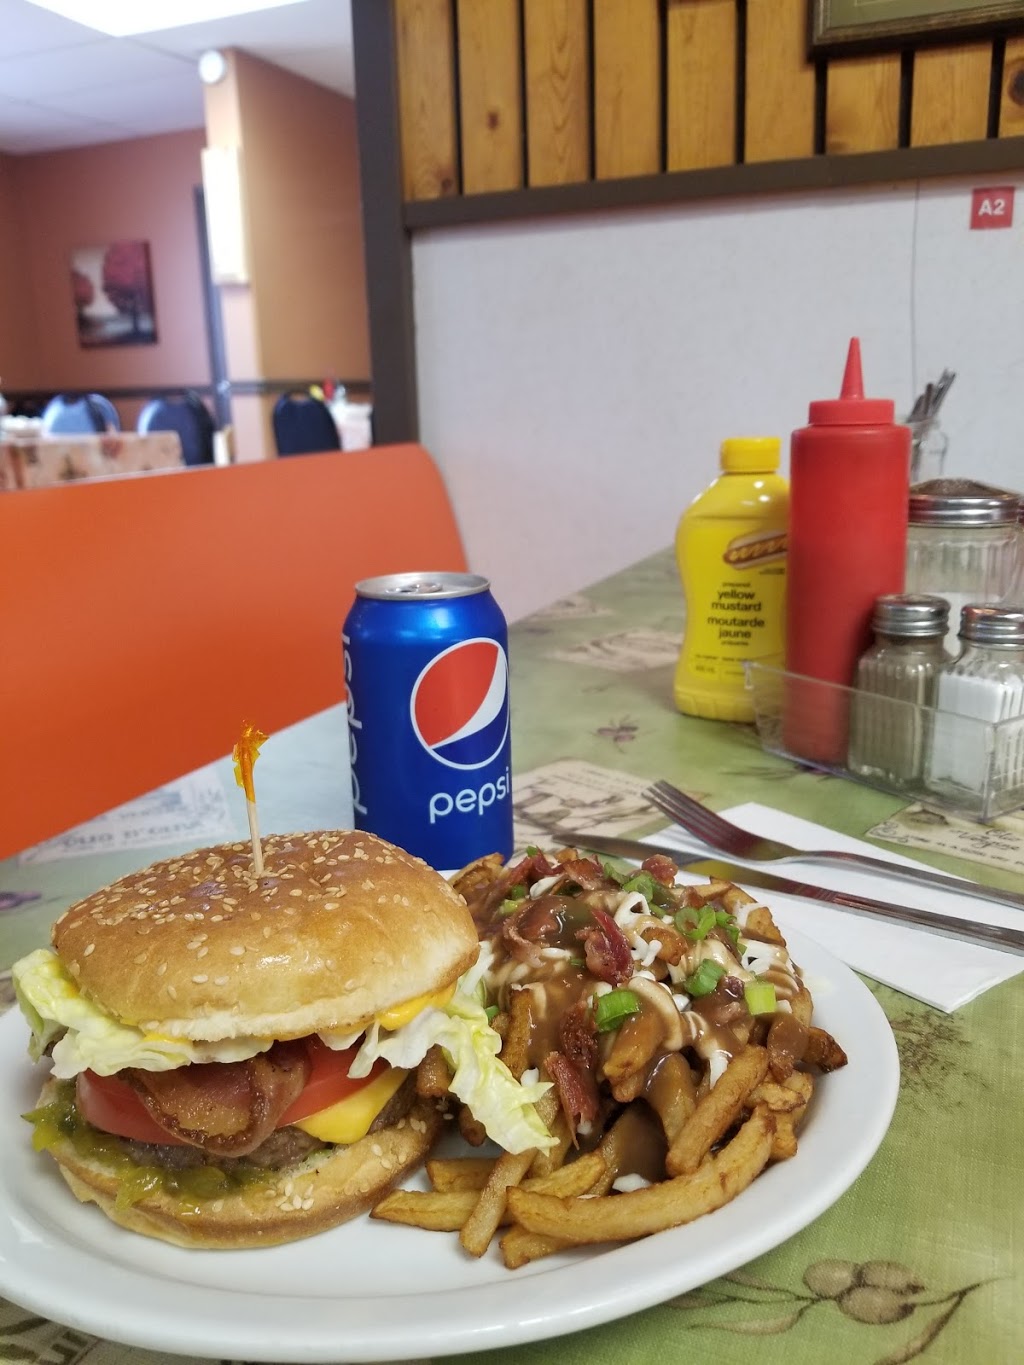 Vickies Snack Bar | 719 Park Ave, Beausejour, MB R0E 0C0, Canada | Phone: (204) 268-1922